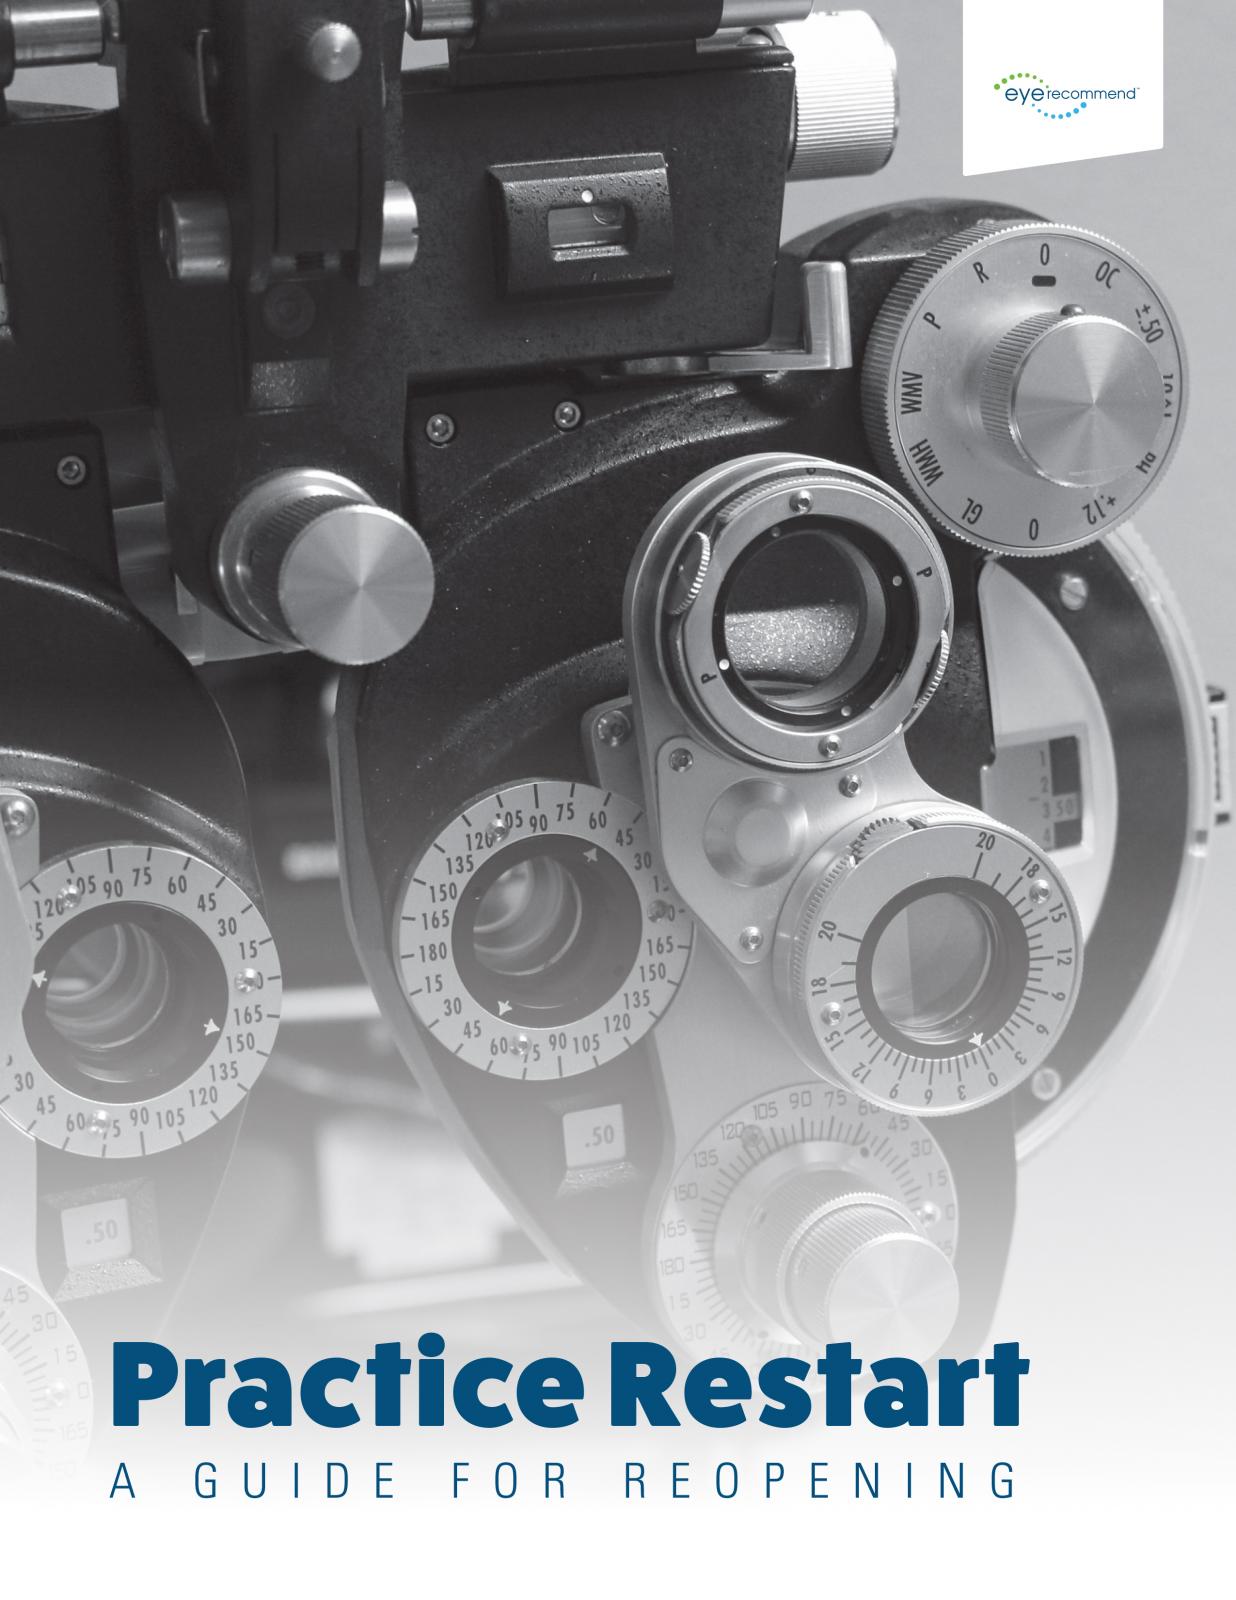 Practice Restart - A Guide for Reopening